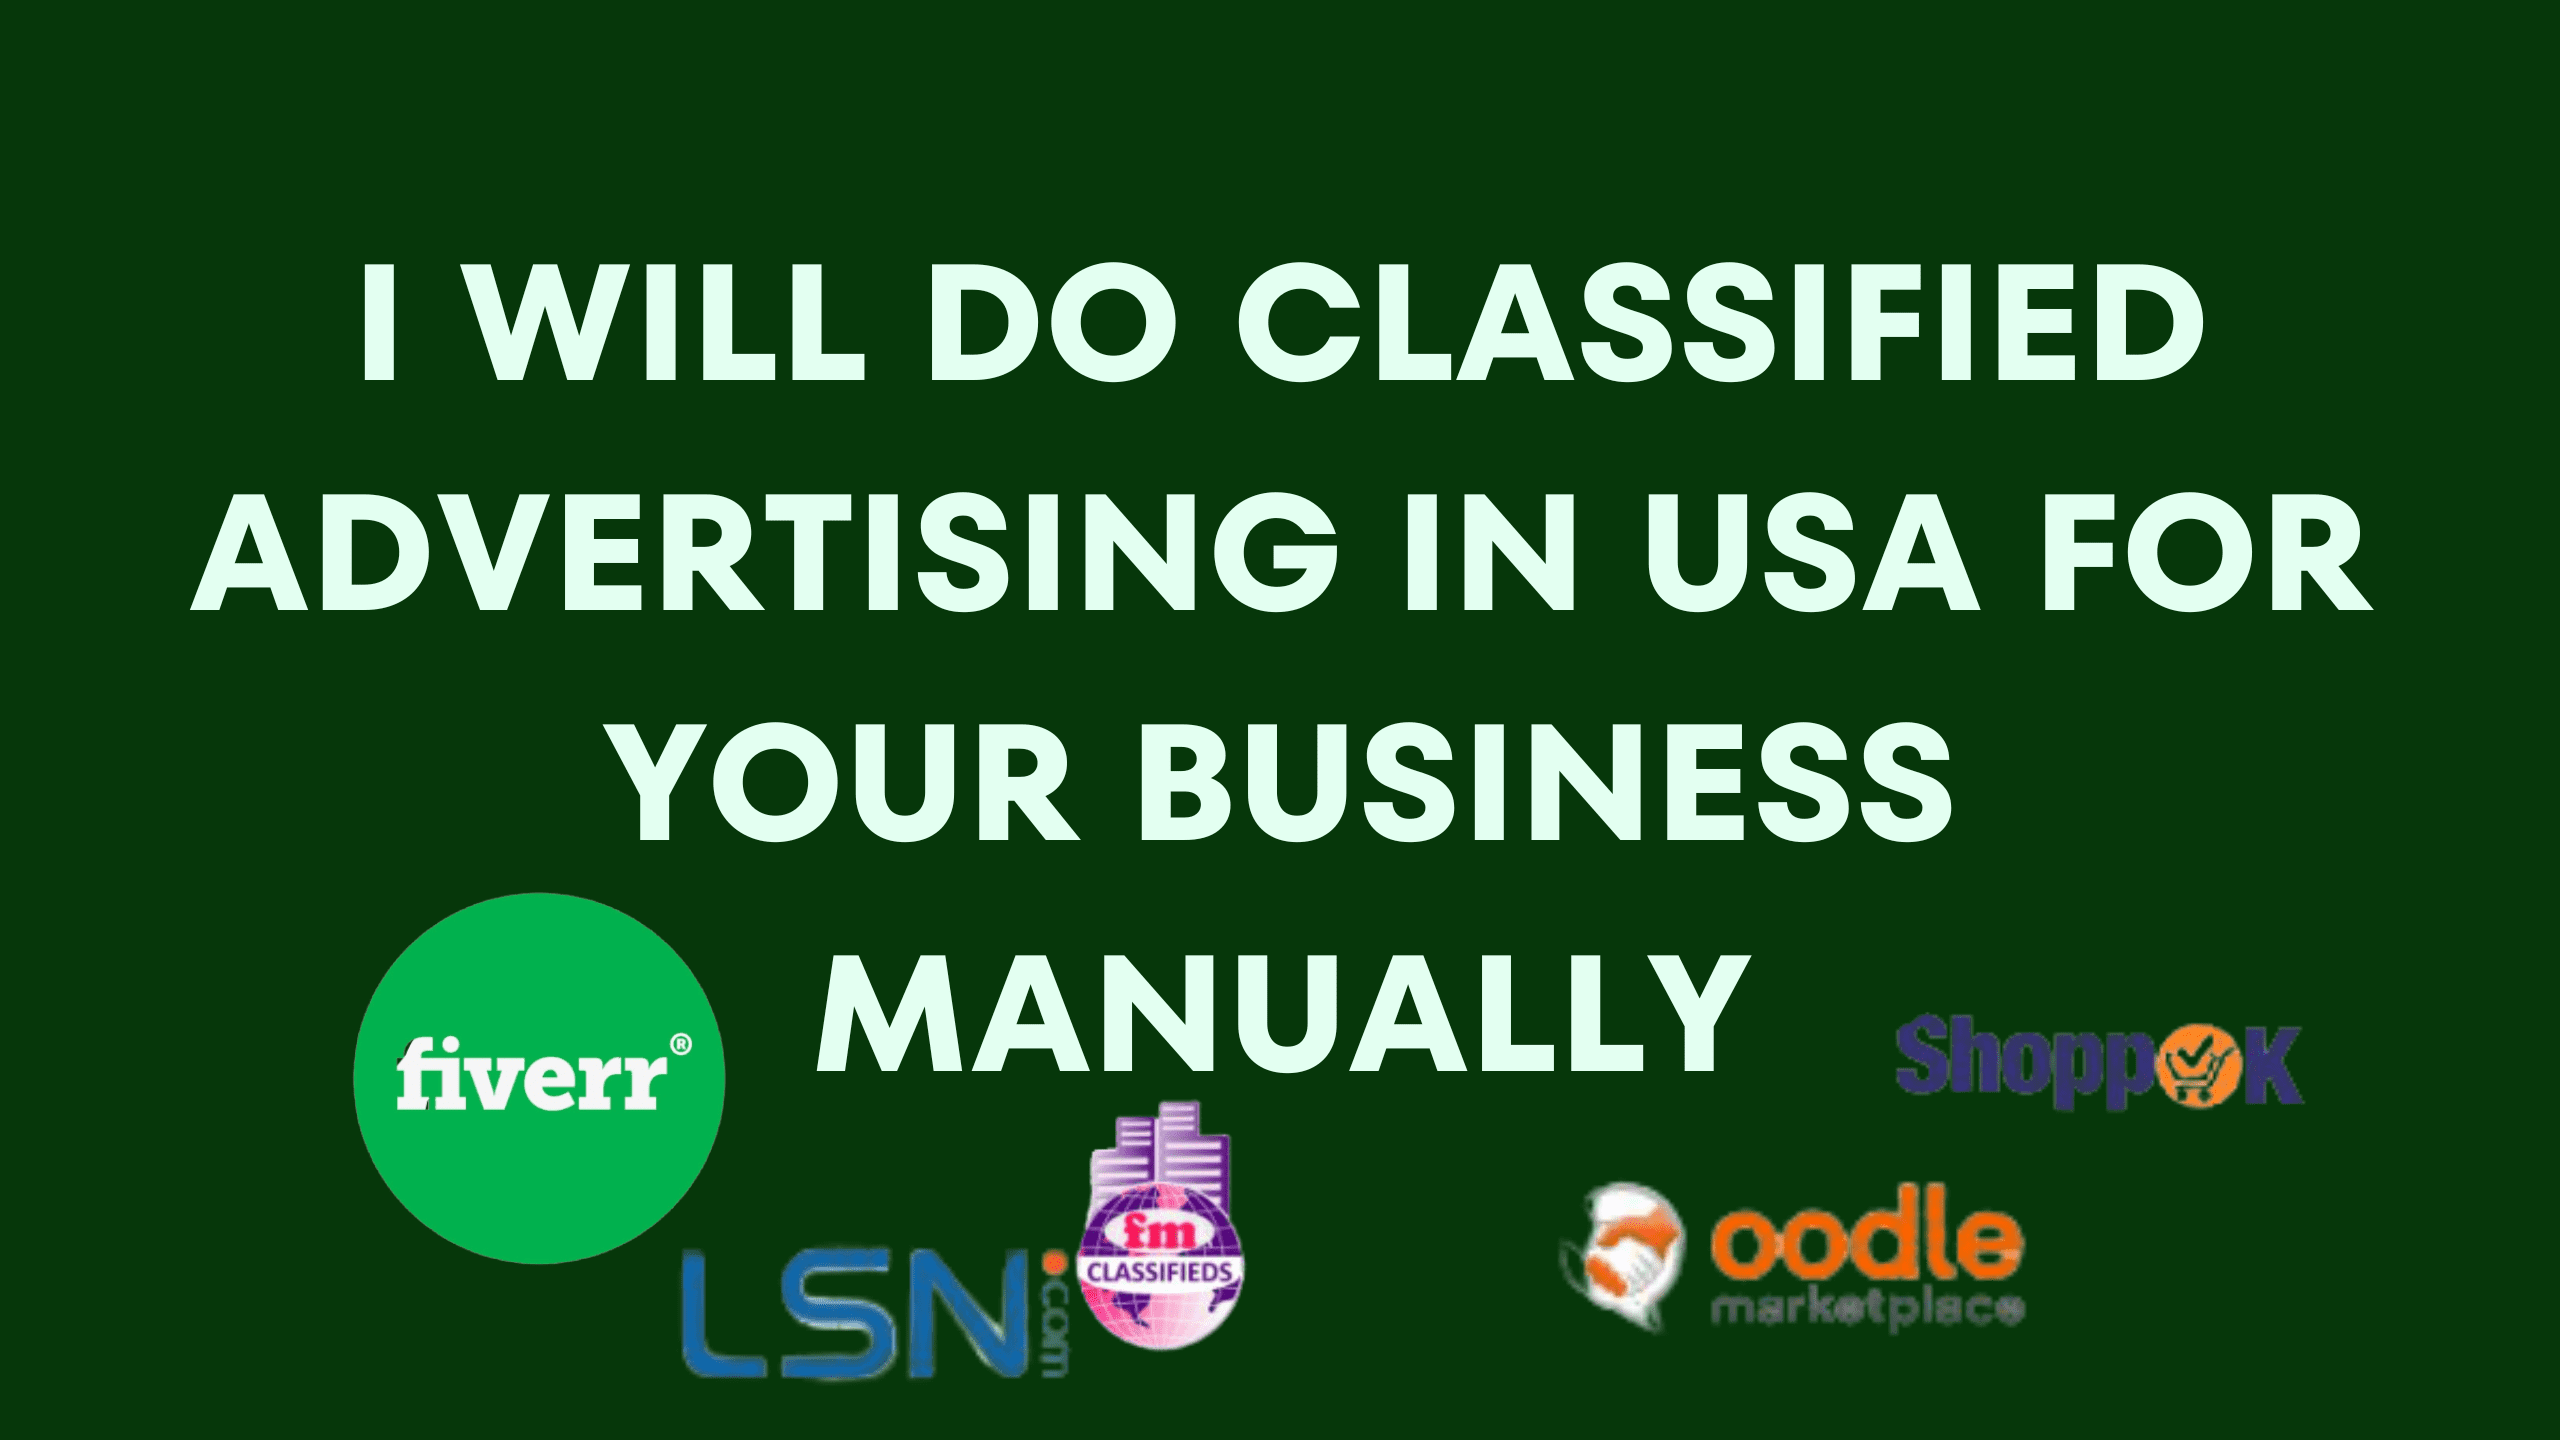 I will do classified advertising in USA for your business manually, FiverrBox